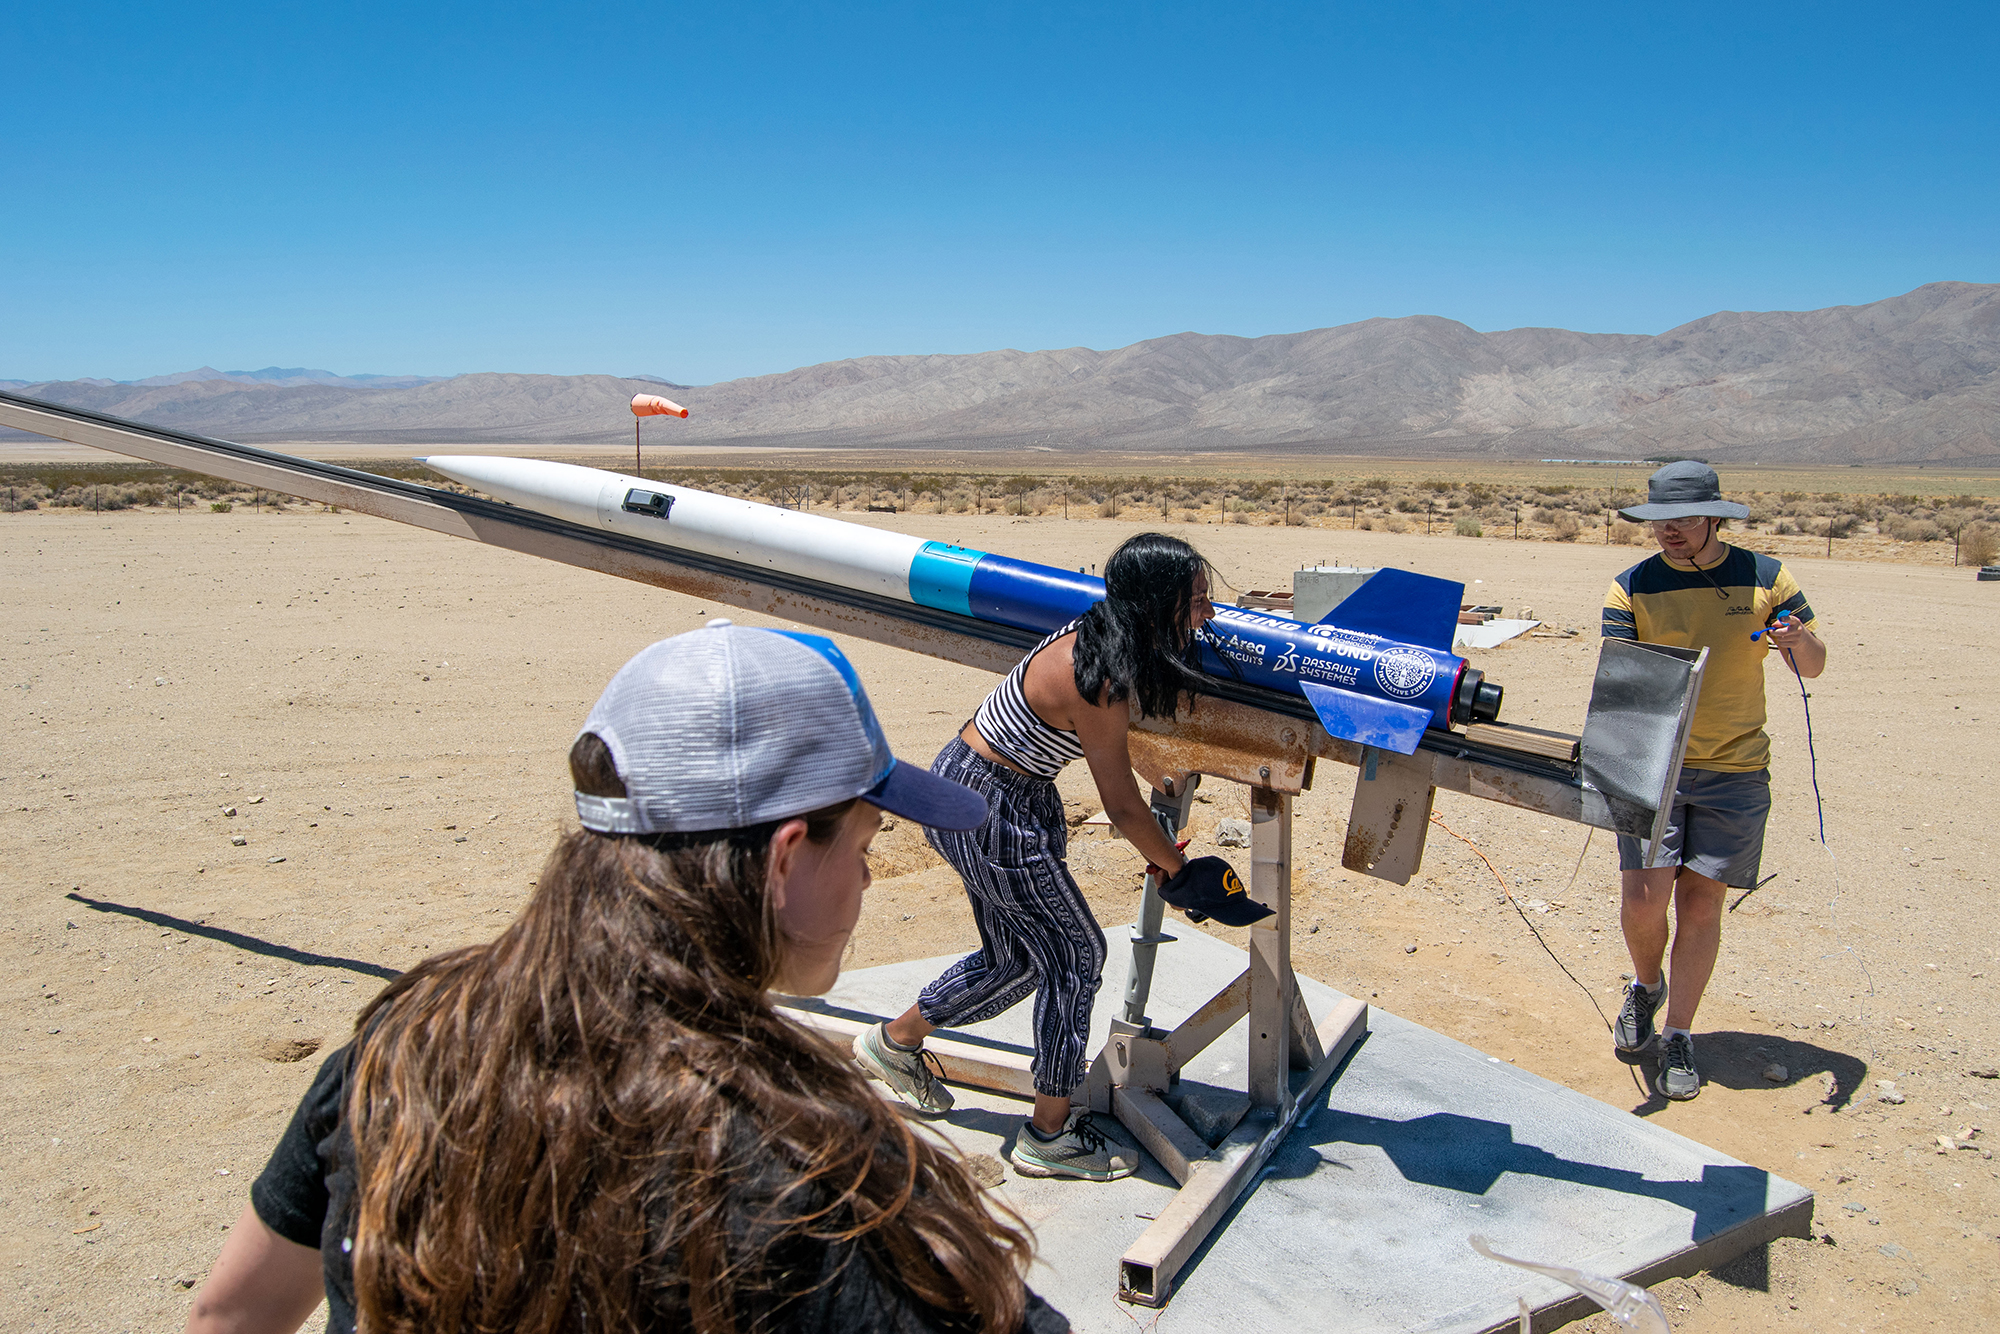 2 women and a man ready a 6-foot blue and white rocket for launch in the desert